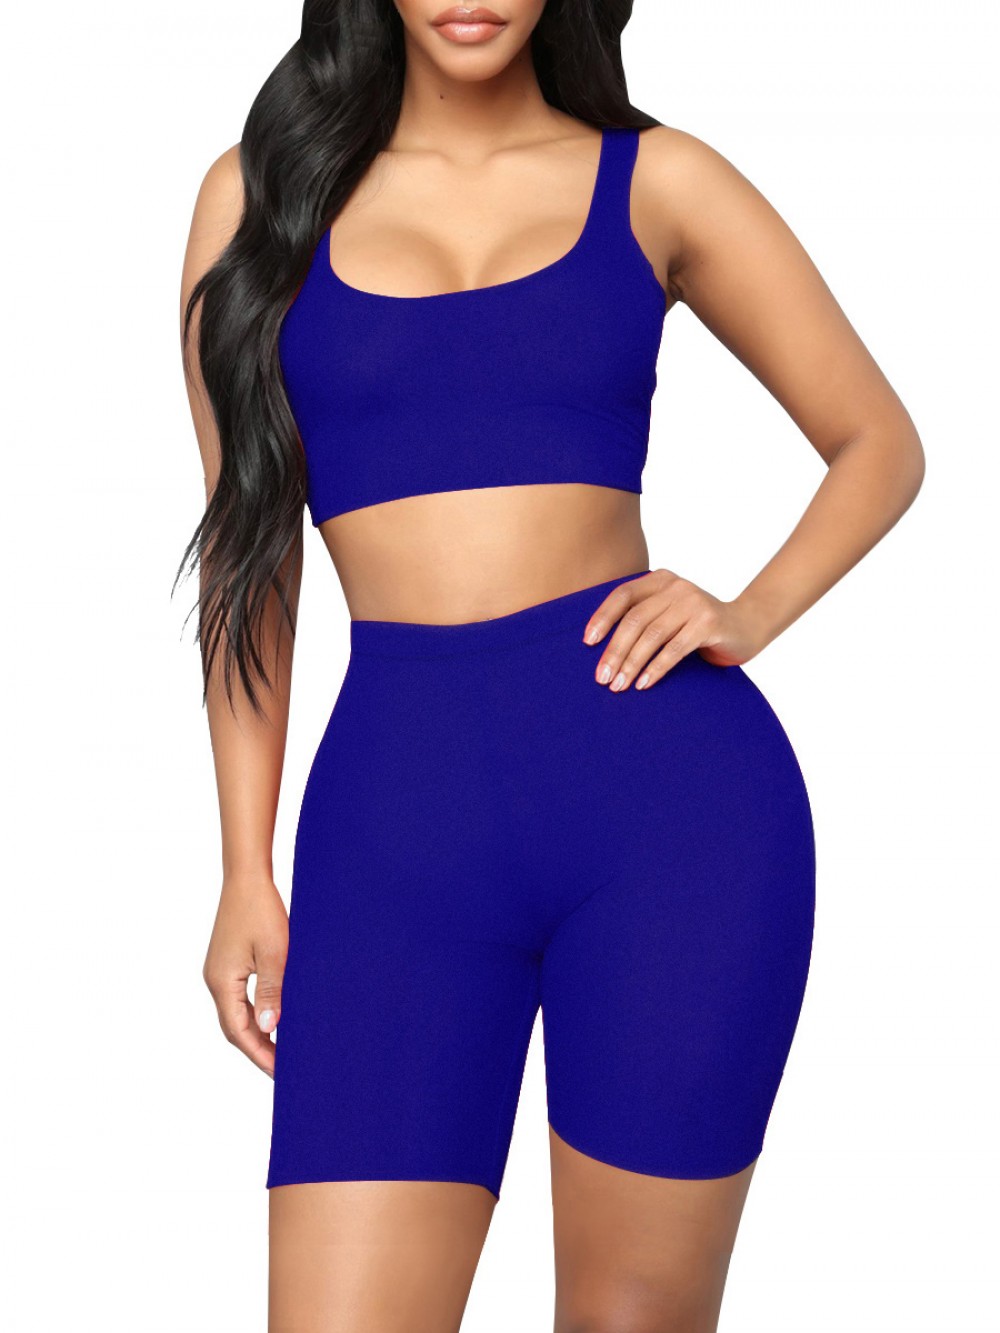 Mod Royal Blue Solid Color Tight Suit High Rise